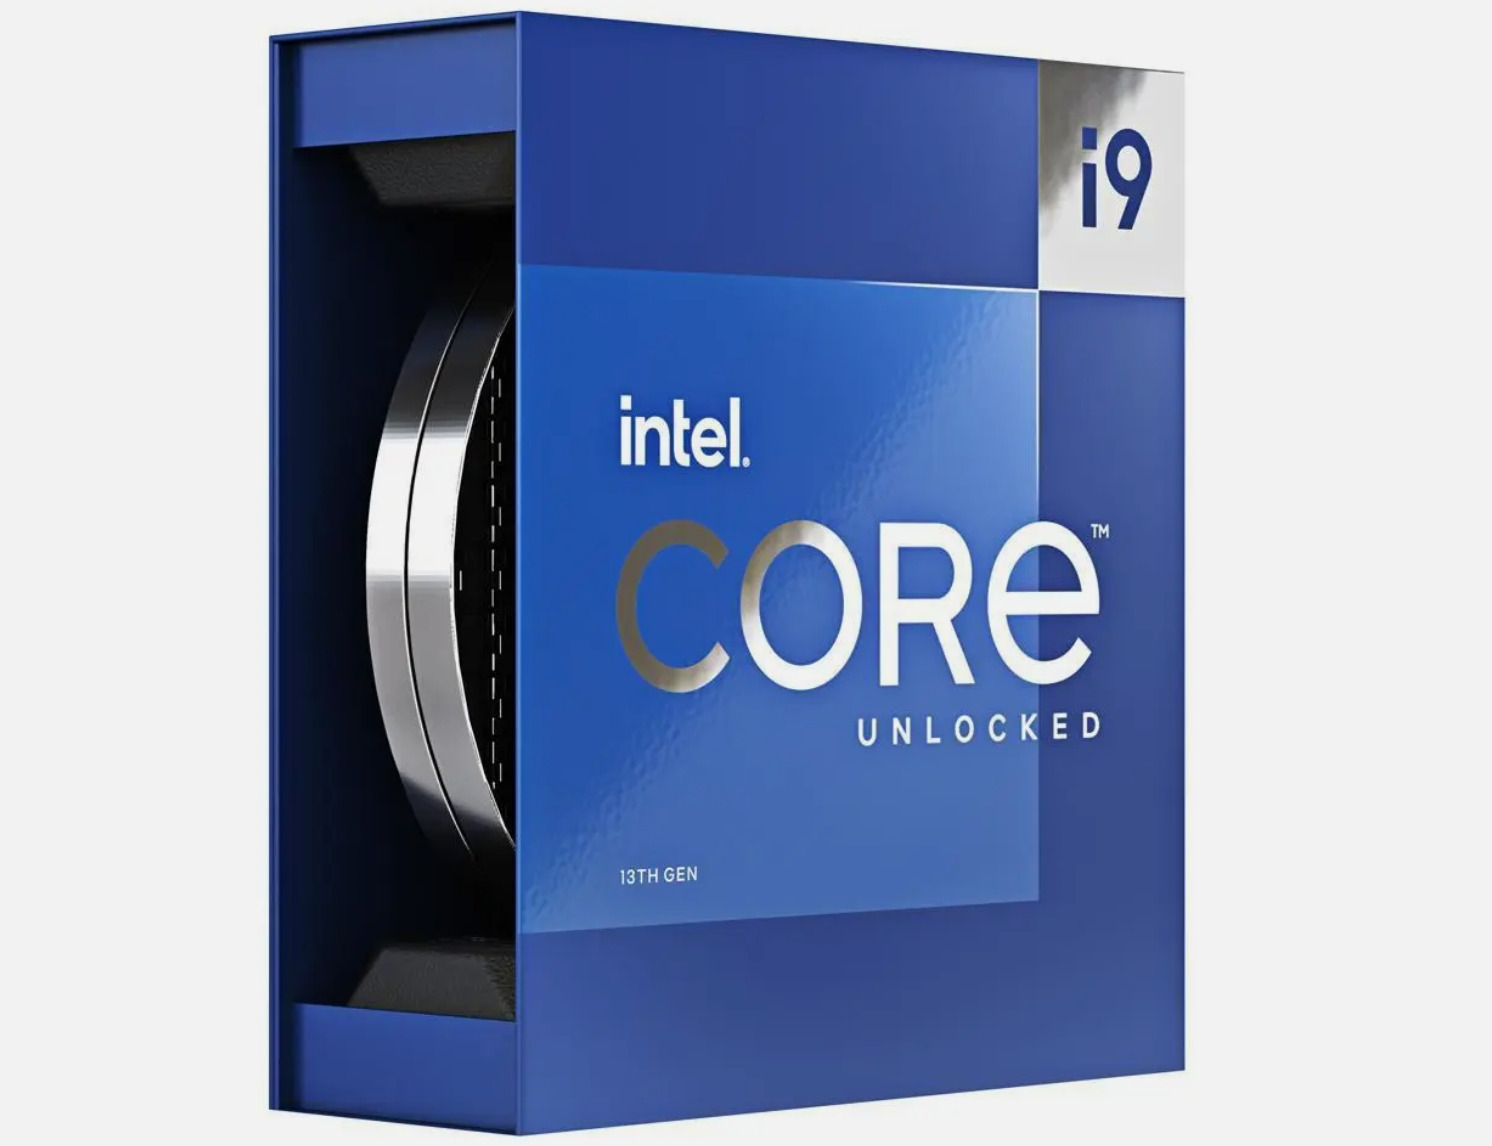 New Sealed Intel Core i9-13900K Processor CPU 36M Cache up to 5.80 GHz 24 Cores